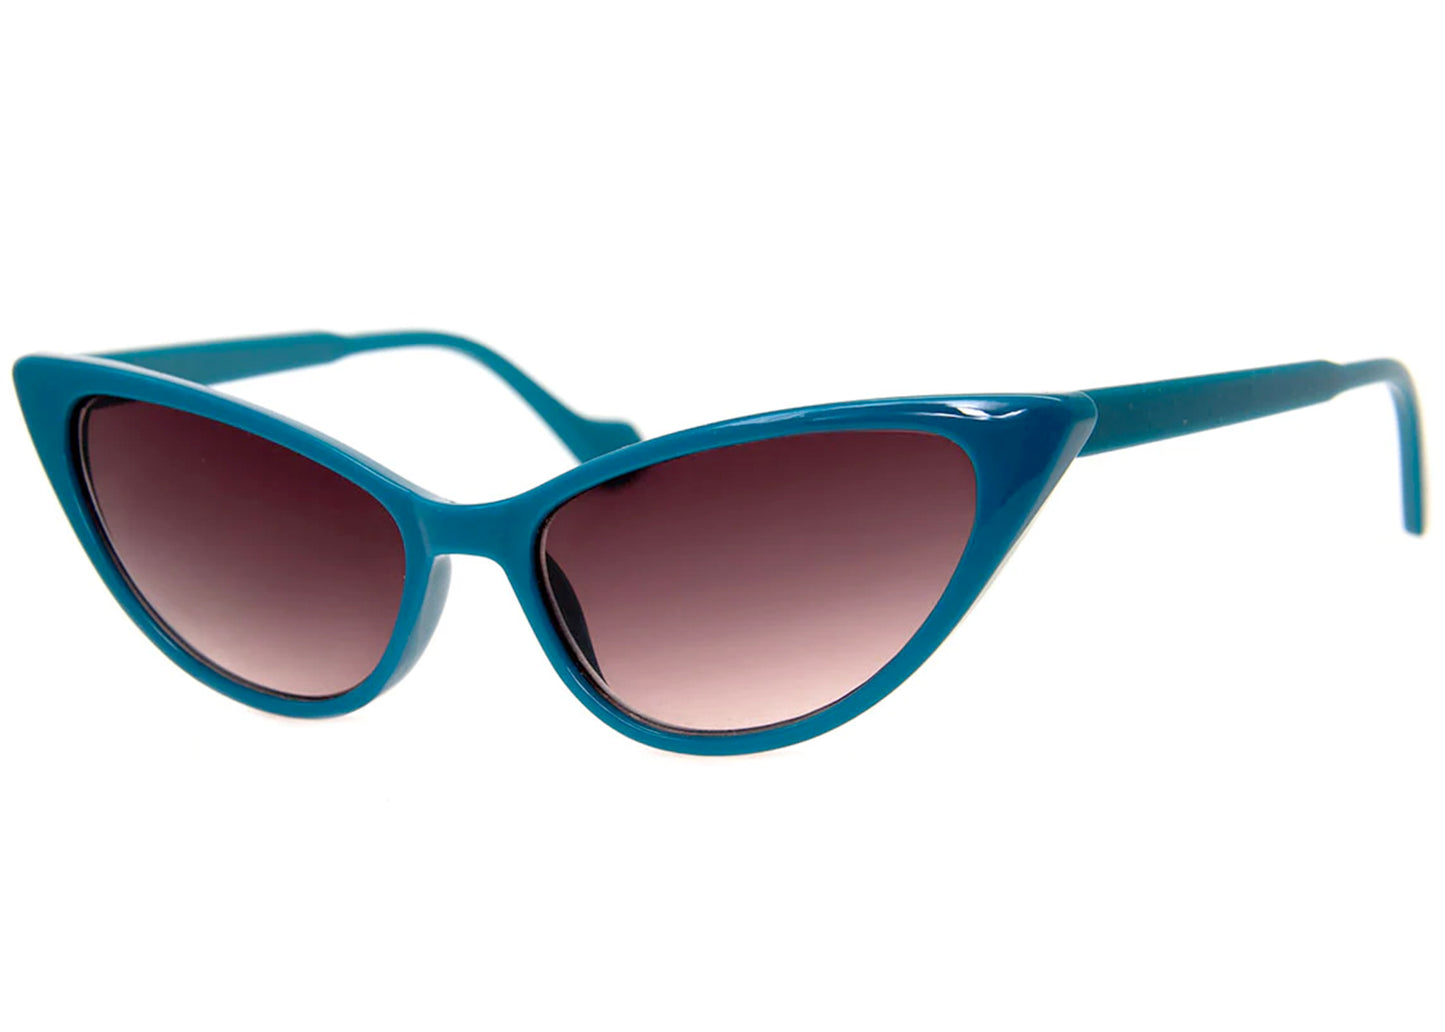 Sultry Sunglasses in Dark Teal